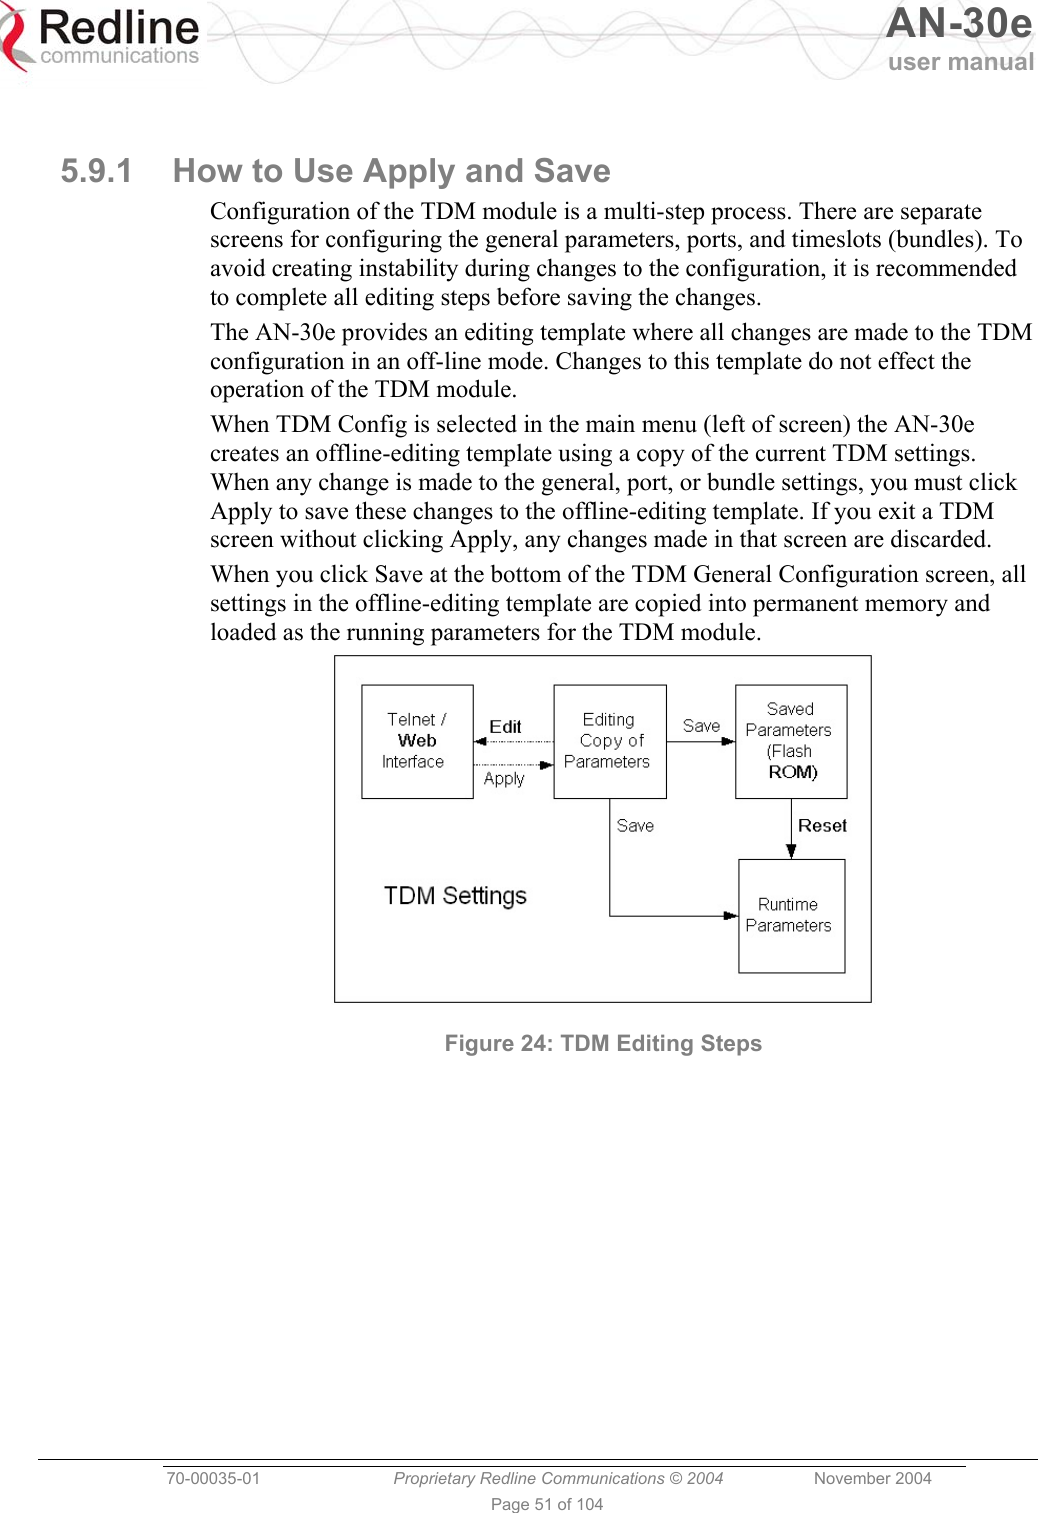   AN-30e user manual  70-00035-01  Proprietary Redline Communications © 2004 November 2004   Page 51 of 104  5.9.1  How to Use Apply and Save Configuration of the TDM module is a multi-step process. There are separate screens for configuring the general parameters, ports, and timeslots (bundles). To avoid creating instability during changes to the configuration, it is recommended to complete all editing steps before saving the changes. The AN-30e provides an editing template where all changes are made to the TDM configuration in an off-line mode. Changes to this template do not effect the operation of the TDM module. When TDM Config is selected in the main menu (left of screen) the AN-30e creates an offline-editing template using a copy of the current TDM settings. When any change is made to the general, port, or bundle settings, you must click Apply to save these changes to the offline-editing template. If you exit a TDM screen without clicking Apply, any changes made in that screen are discarded. When you click Save at the bottom of the TDM General Configuration screen, all settings in the offline-editing template are copied into permanent memory and loaded as the running parameters for the TDM module.   Figure 24: TDM Editing Steps   